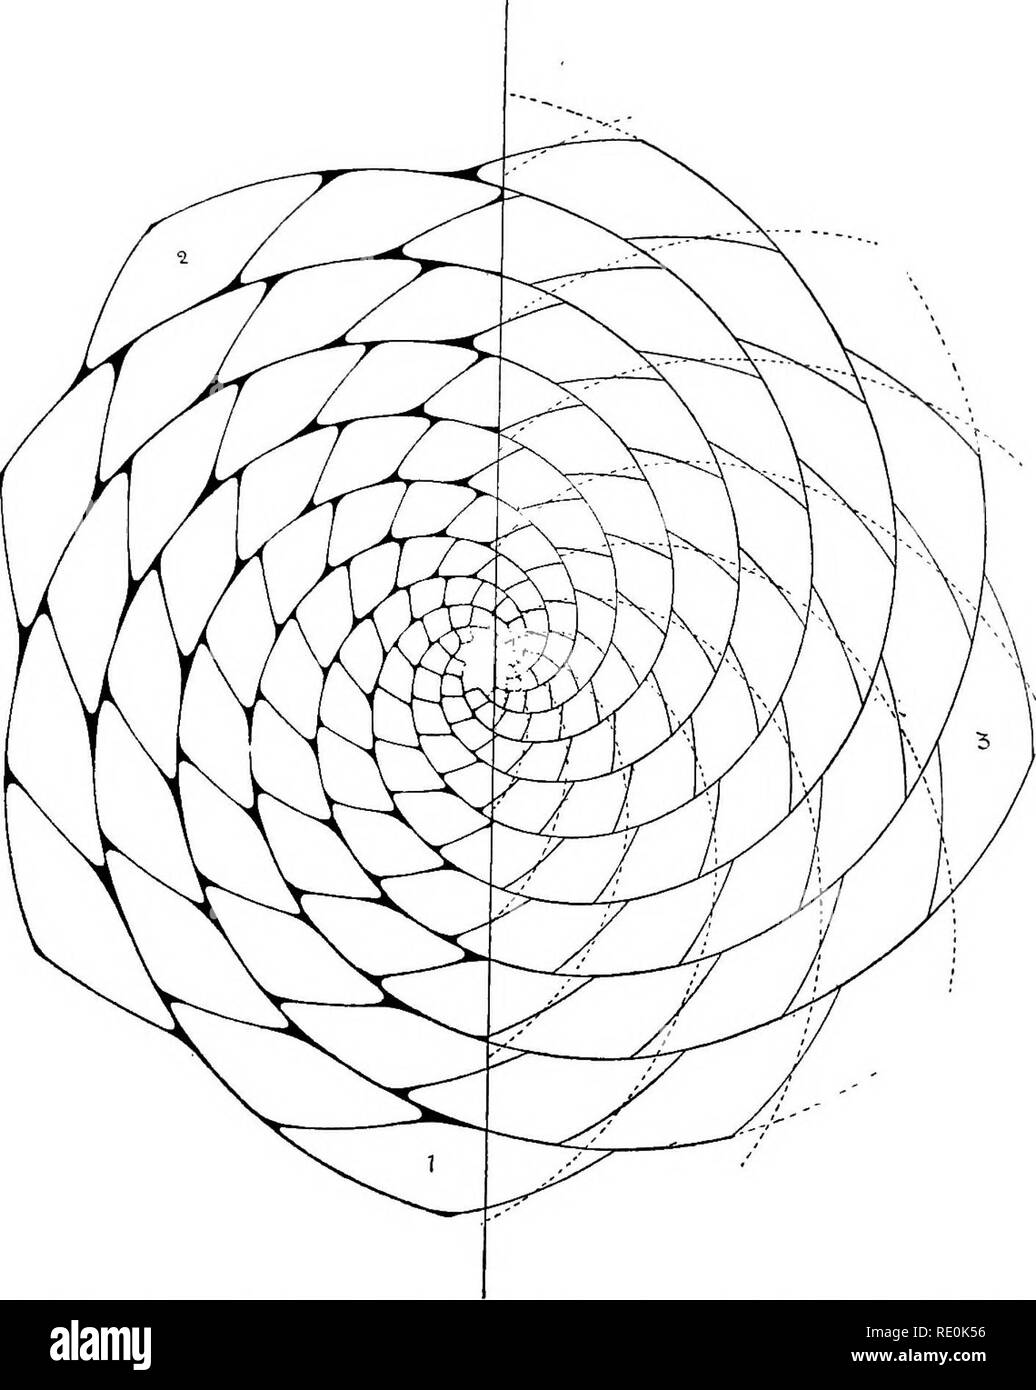 . On the relation of phyllotaxis to mechanical laws. Phyllotaxis; Leaves. THE BILATERALITY OF APPENDAGES. 293 In dealing with such a phenomenon it is necessary, to begin with, to distinguish between facts of observation and any inter-. Fig. 100.—Geometrical construction, including progressive &quot; dorsiventrality &quot; and sliding-growth effect for system (8 + 13). Drawn with construction curve (Type II.) for uniformly retarded growth. ' / ^ pretations which may have been ascribed to them. Now the facts observable are very definite: the rhomboidal primordia apparently thrust laterally along Stock Photo